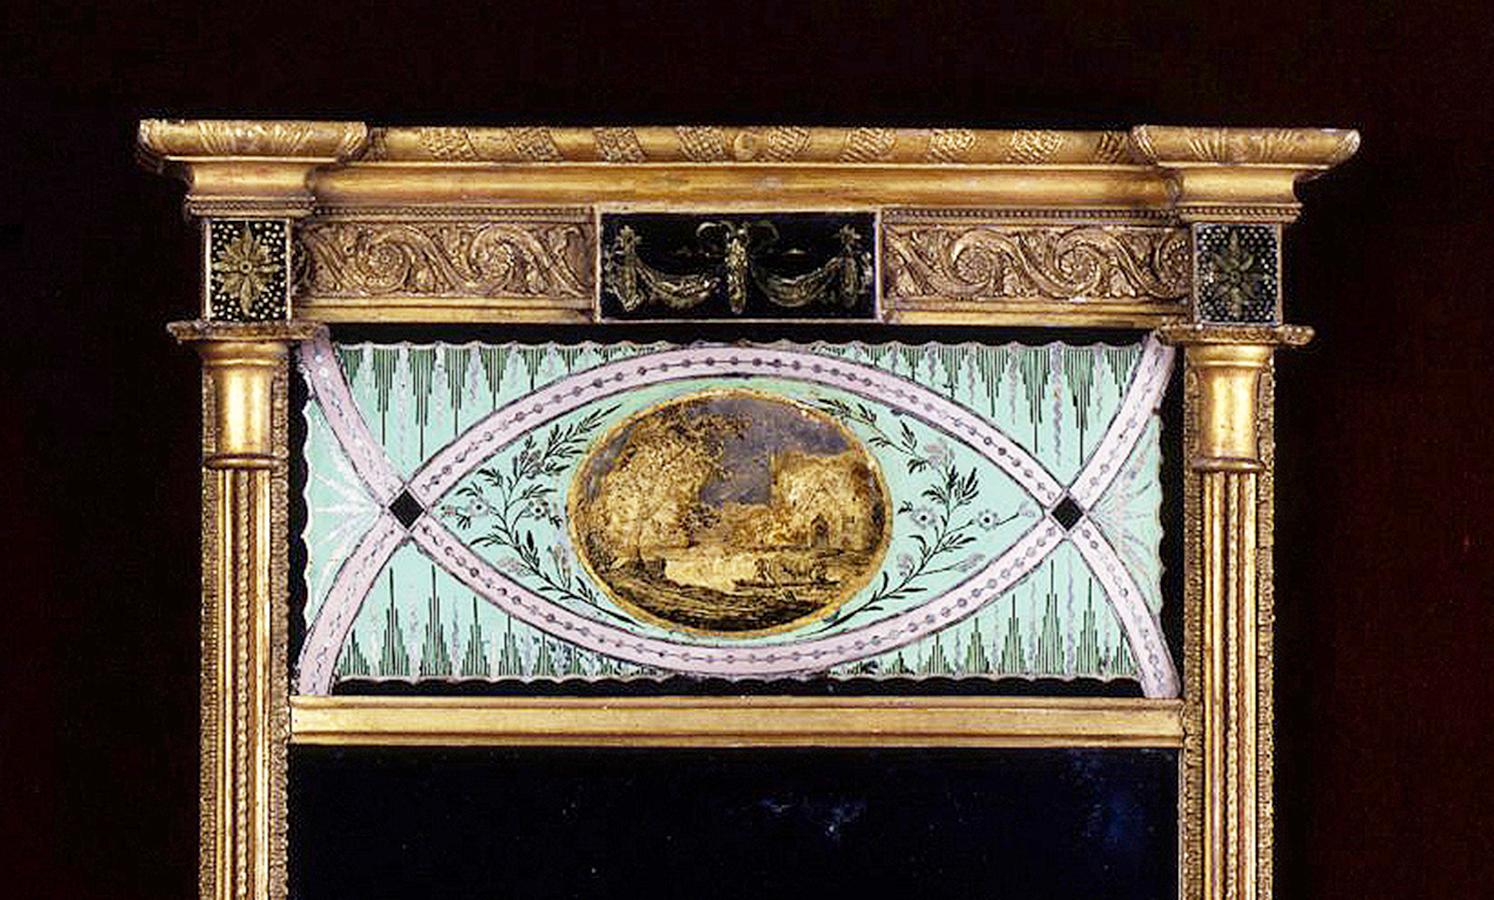 Pier mirror with Reverse Painted, or Eglomisé, Panels, about 1800
New York, New York
Eastern white pine, gessoed and gilded, with compo ornament, glass, reverse painted and gilded, and mirror
42 7/8 in. high, 22 1/2 in. wide, about 3 inches